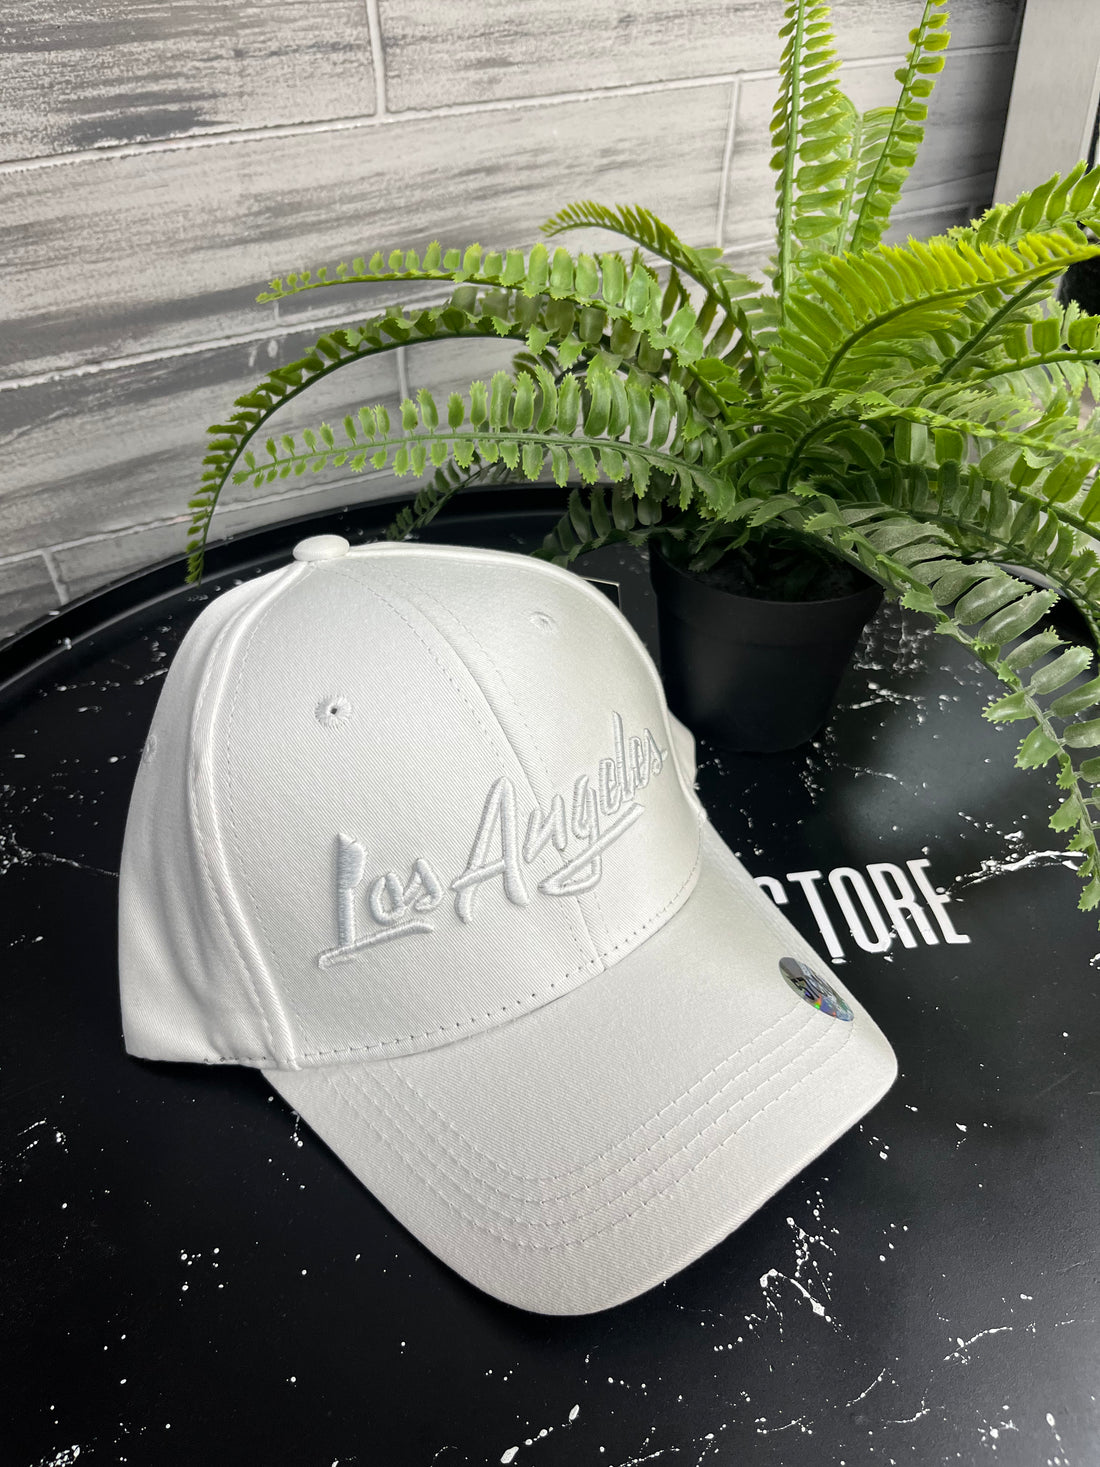 Casquette Los Angeles blanche - Stayin